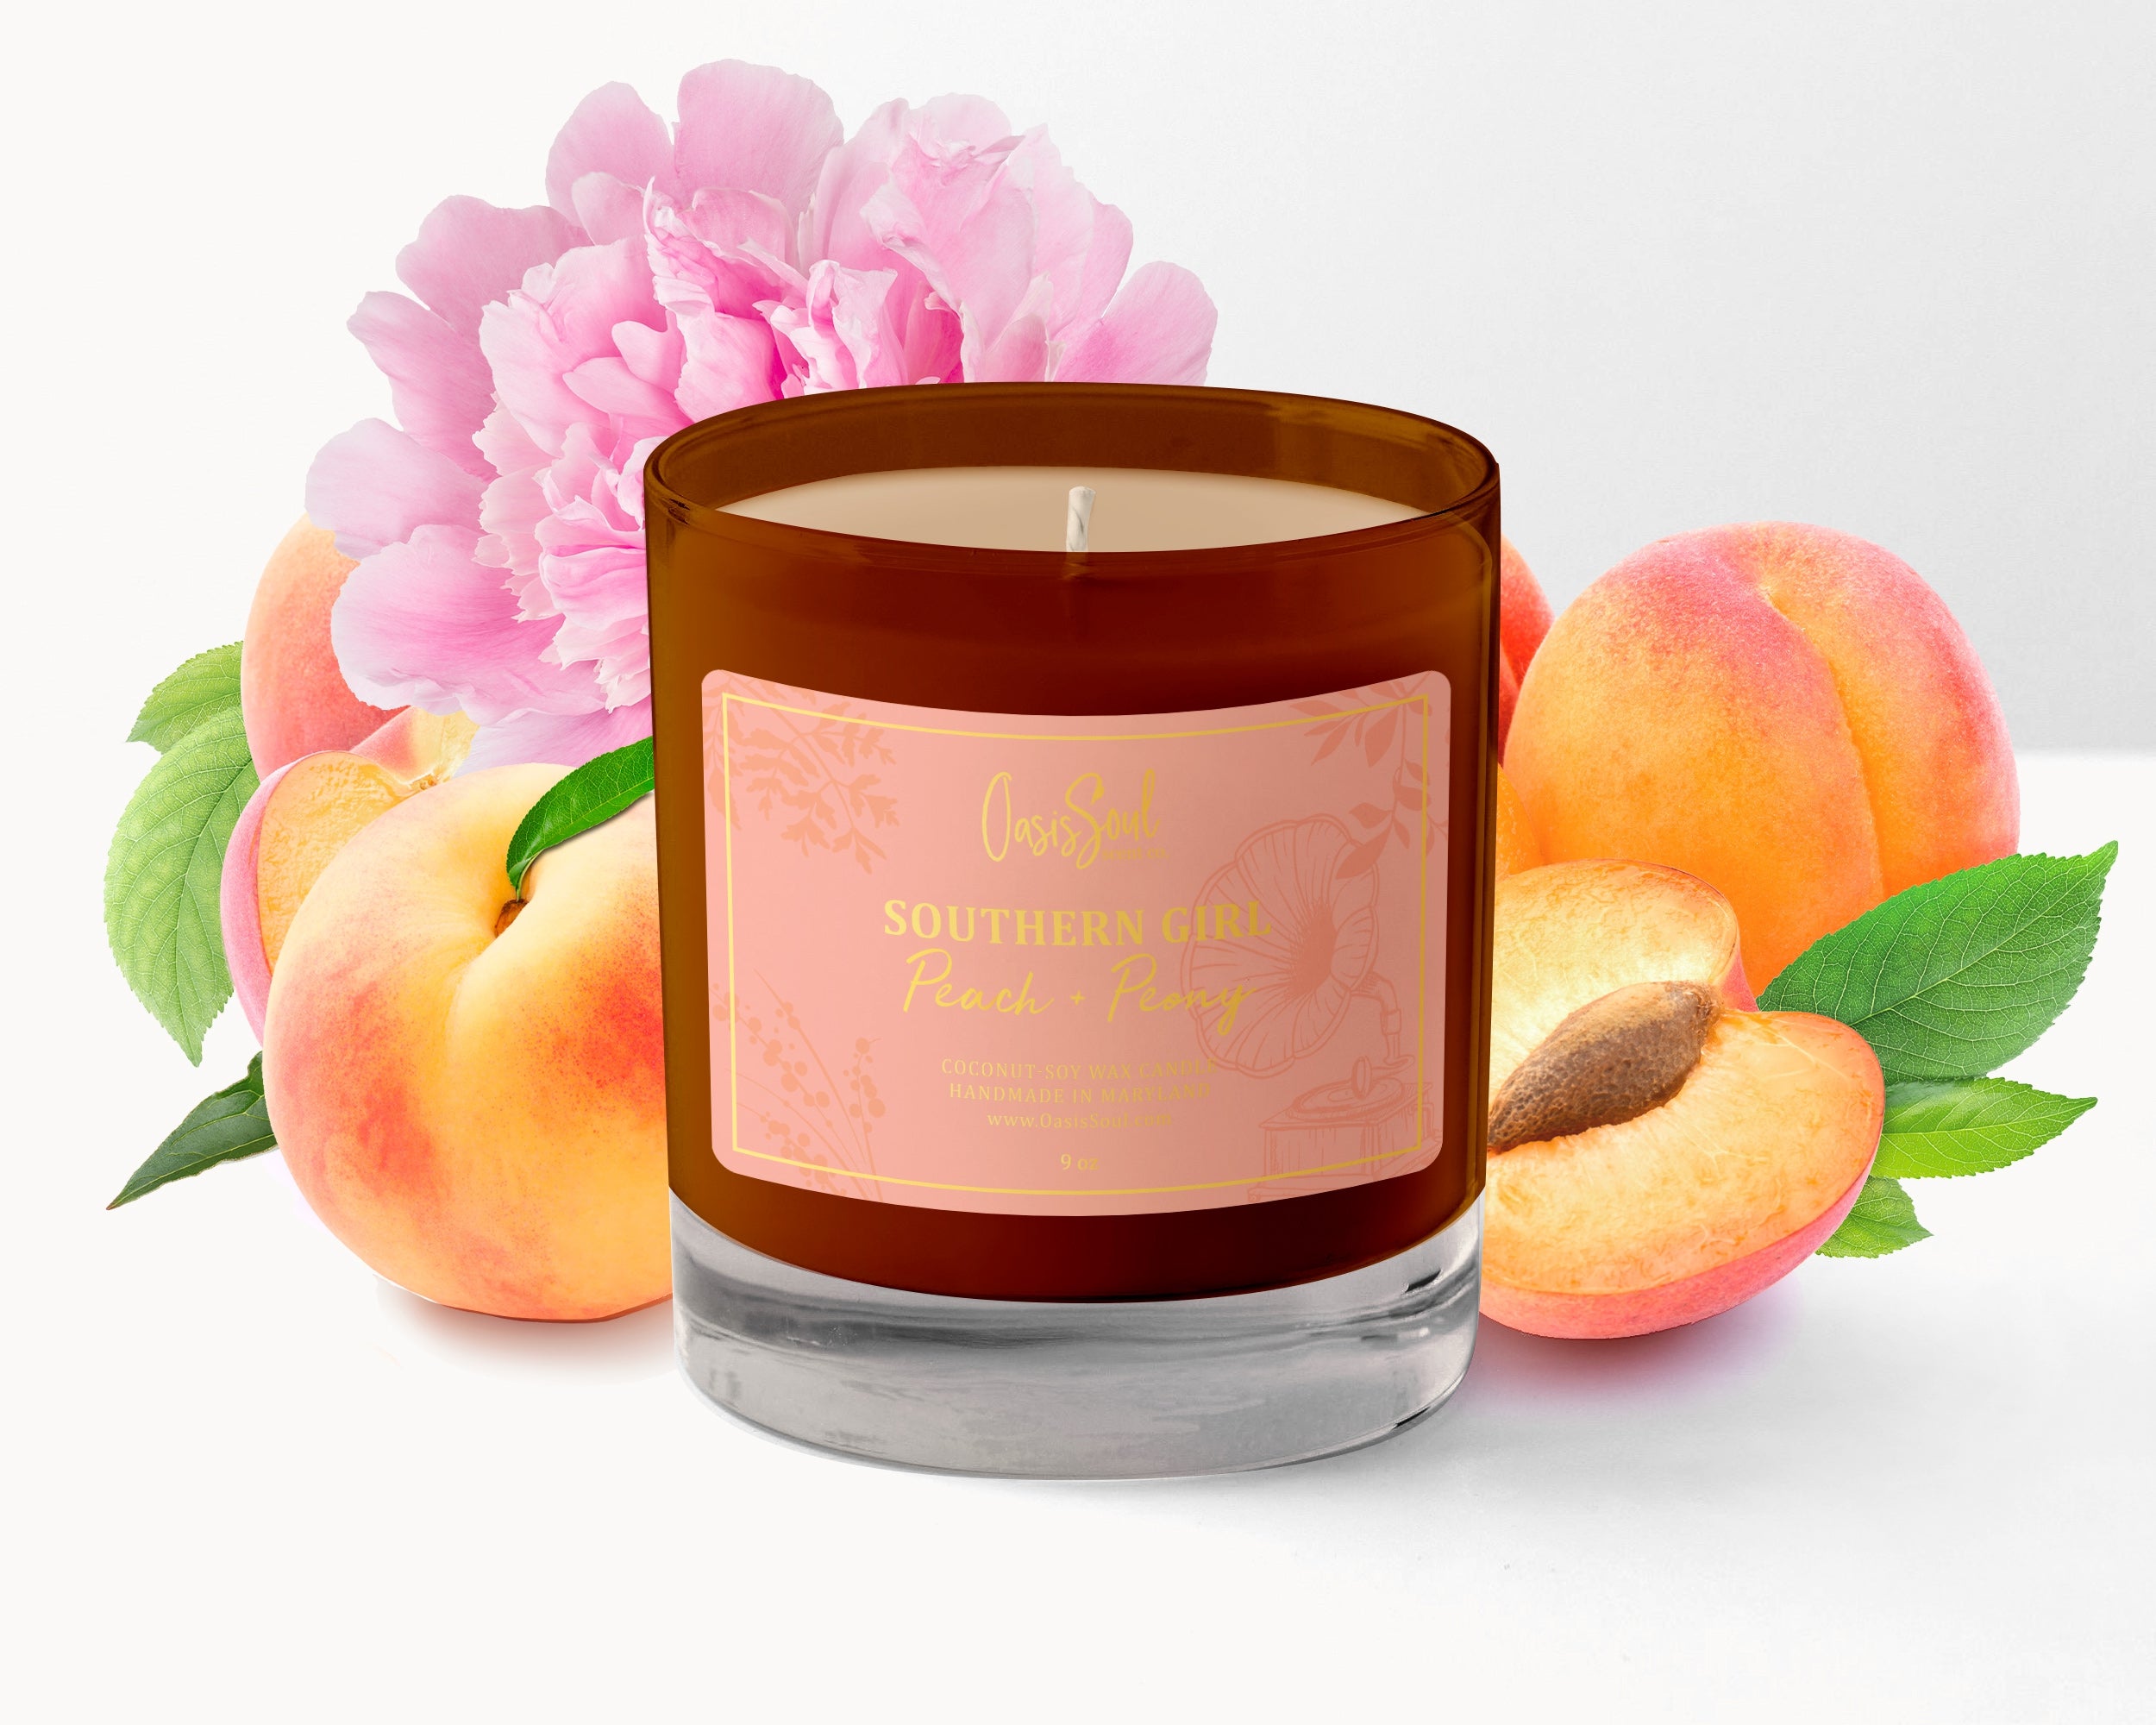 SOUTHERN GIRL - Amber Classics Candle {peach + peony}